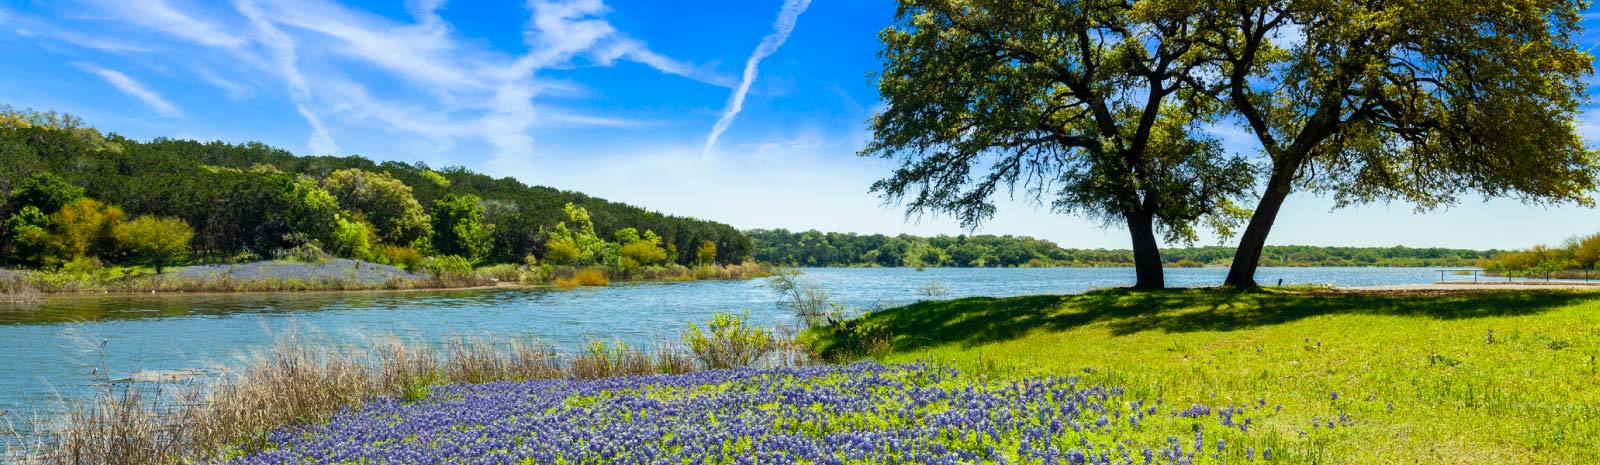 Landscape Shot of Scenic landscape in Texas Hill country